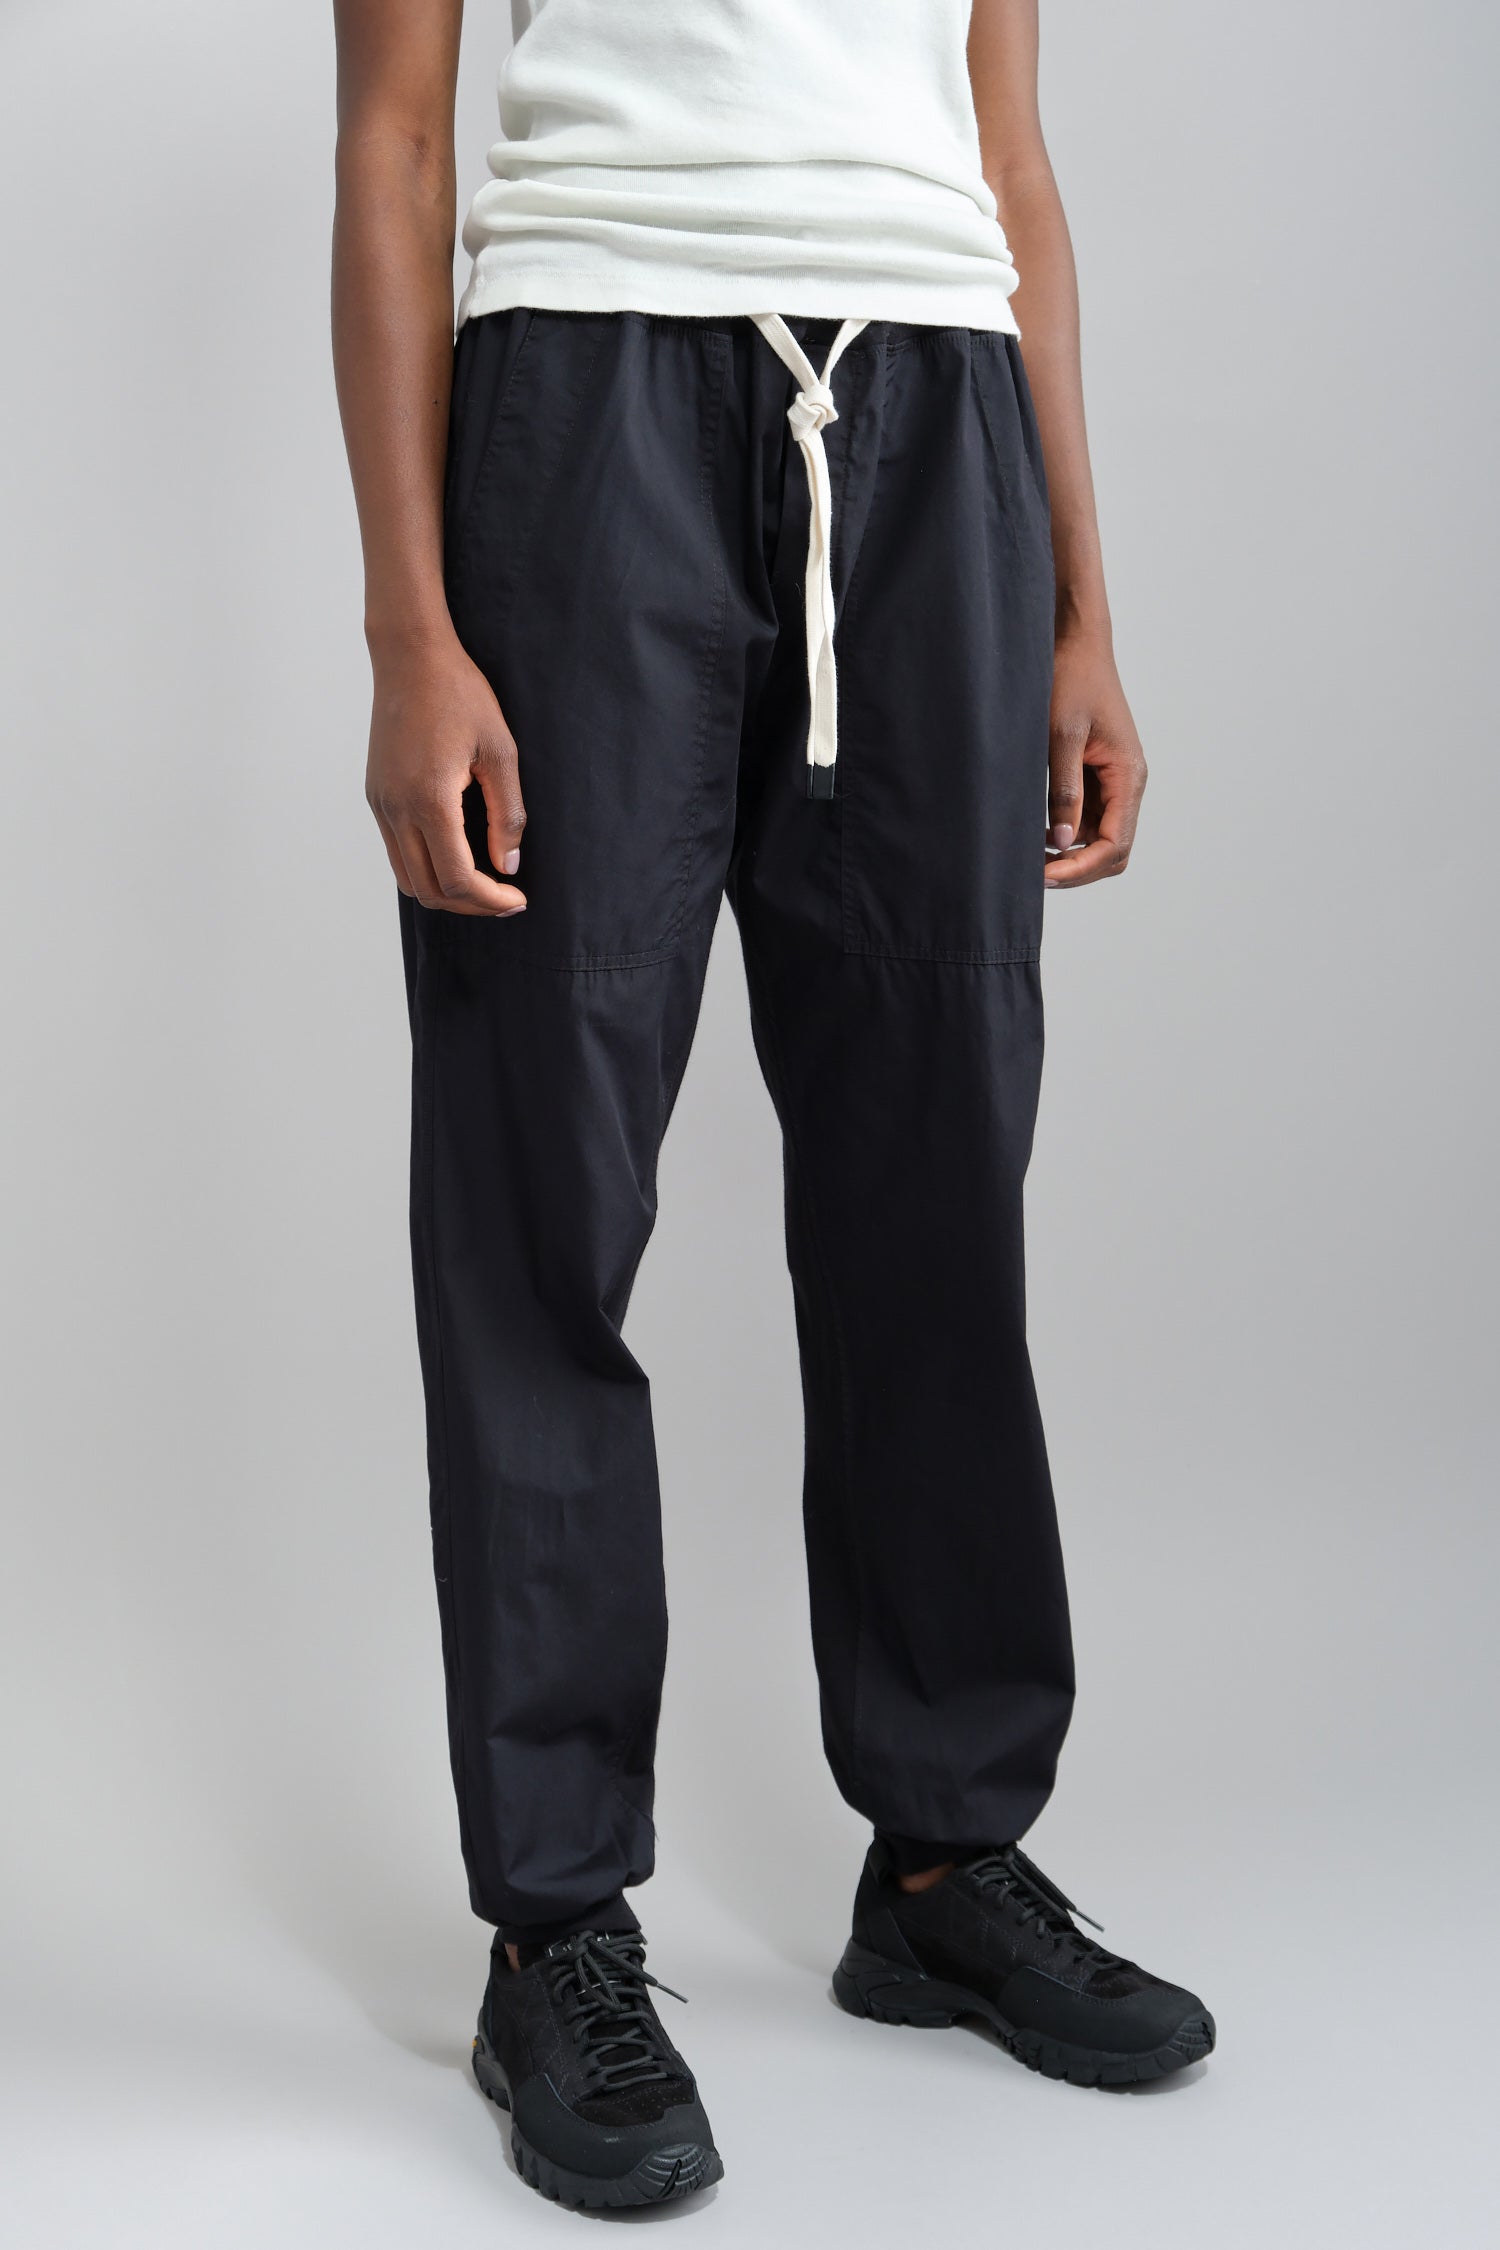 Front of Slim Utility Cotton Pant